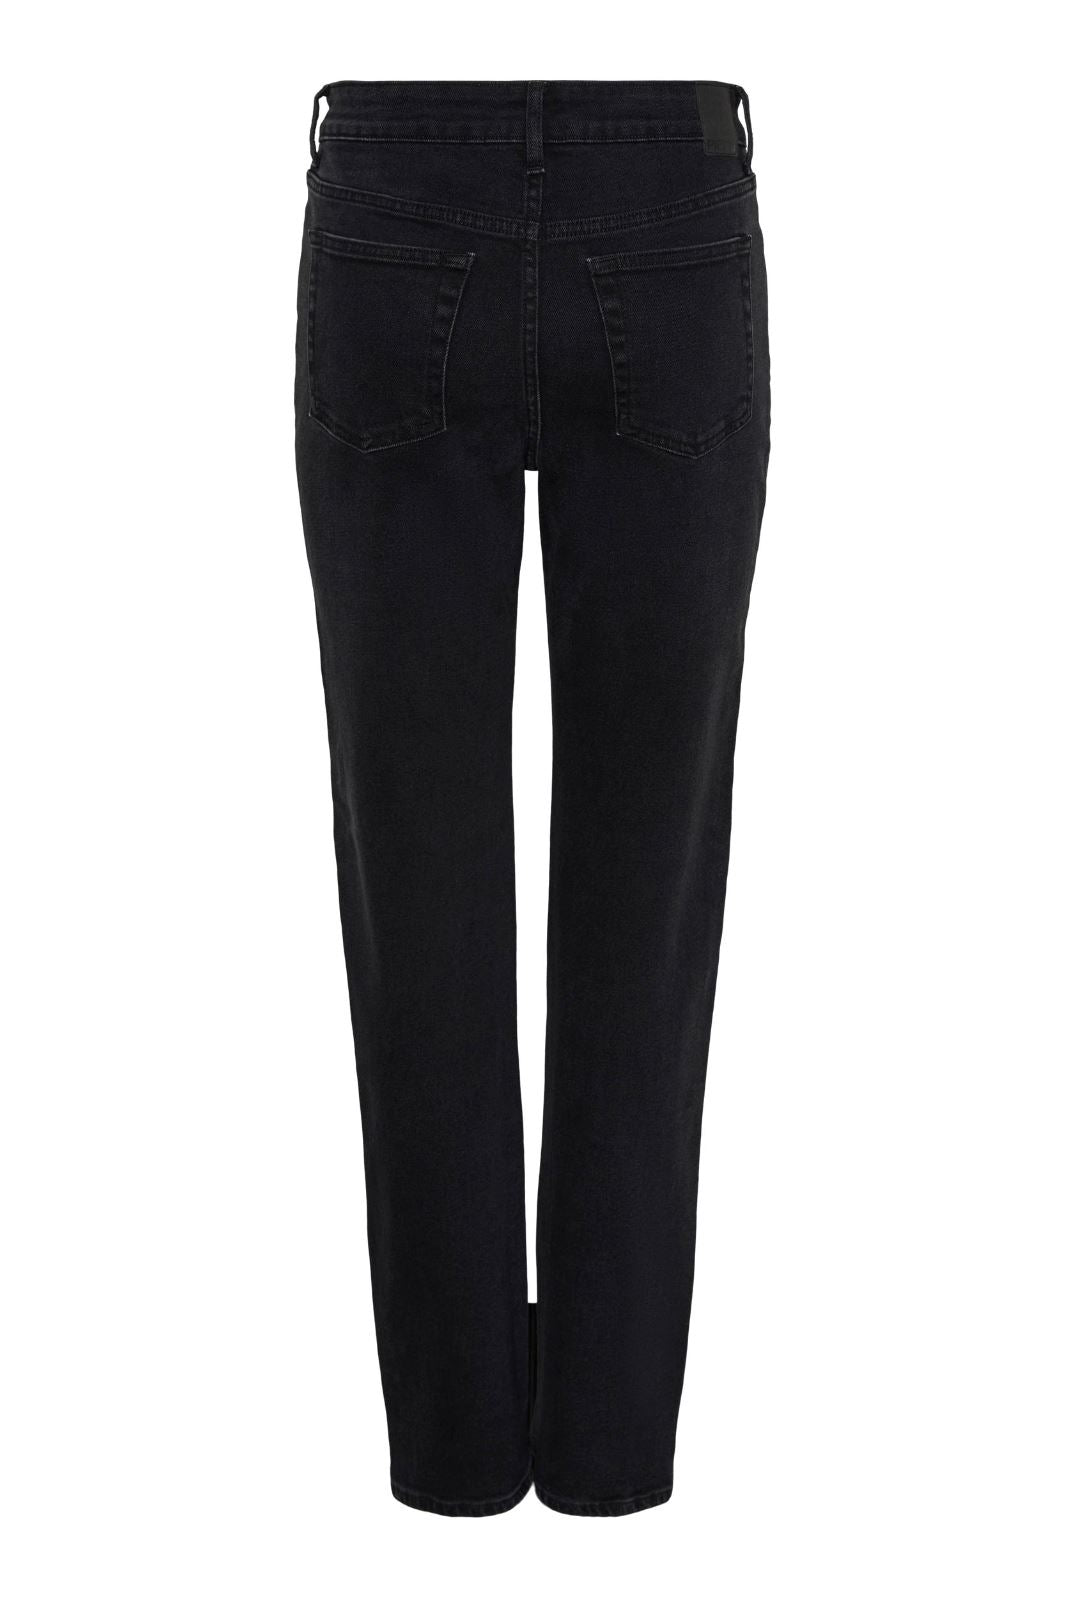 Pieces - Pckelly Straight Jeans Bl102 - 4421715 Black Jeans 